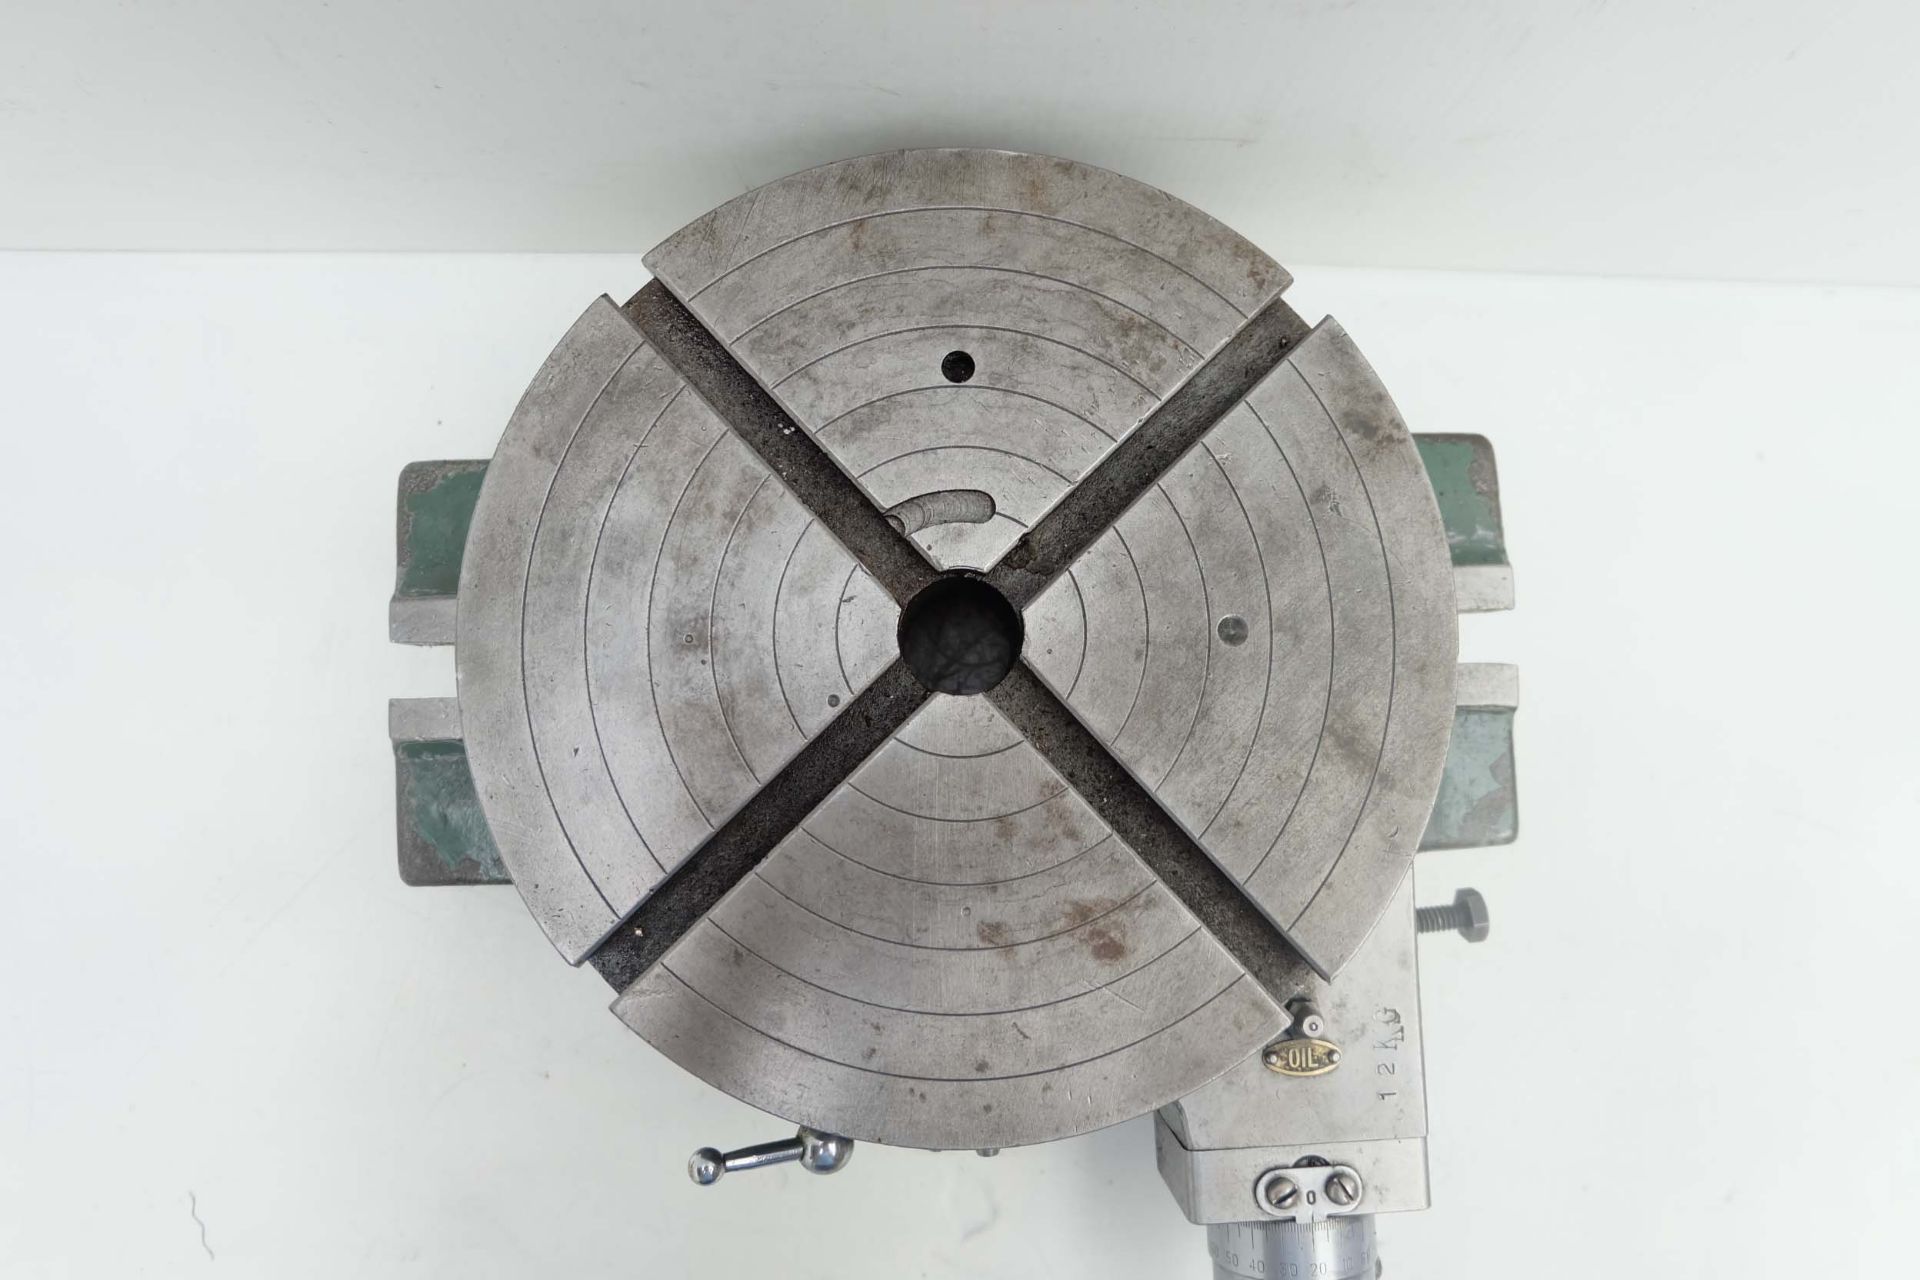 8" Diameter Rotary Table. Tee Slotted Table. Height 2 3/8" (60mm). - Image 4 of 5